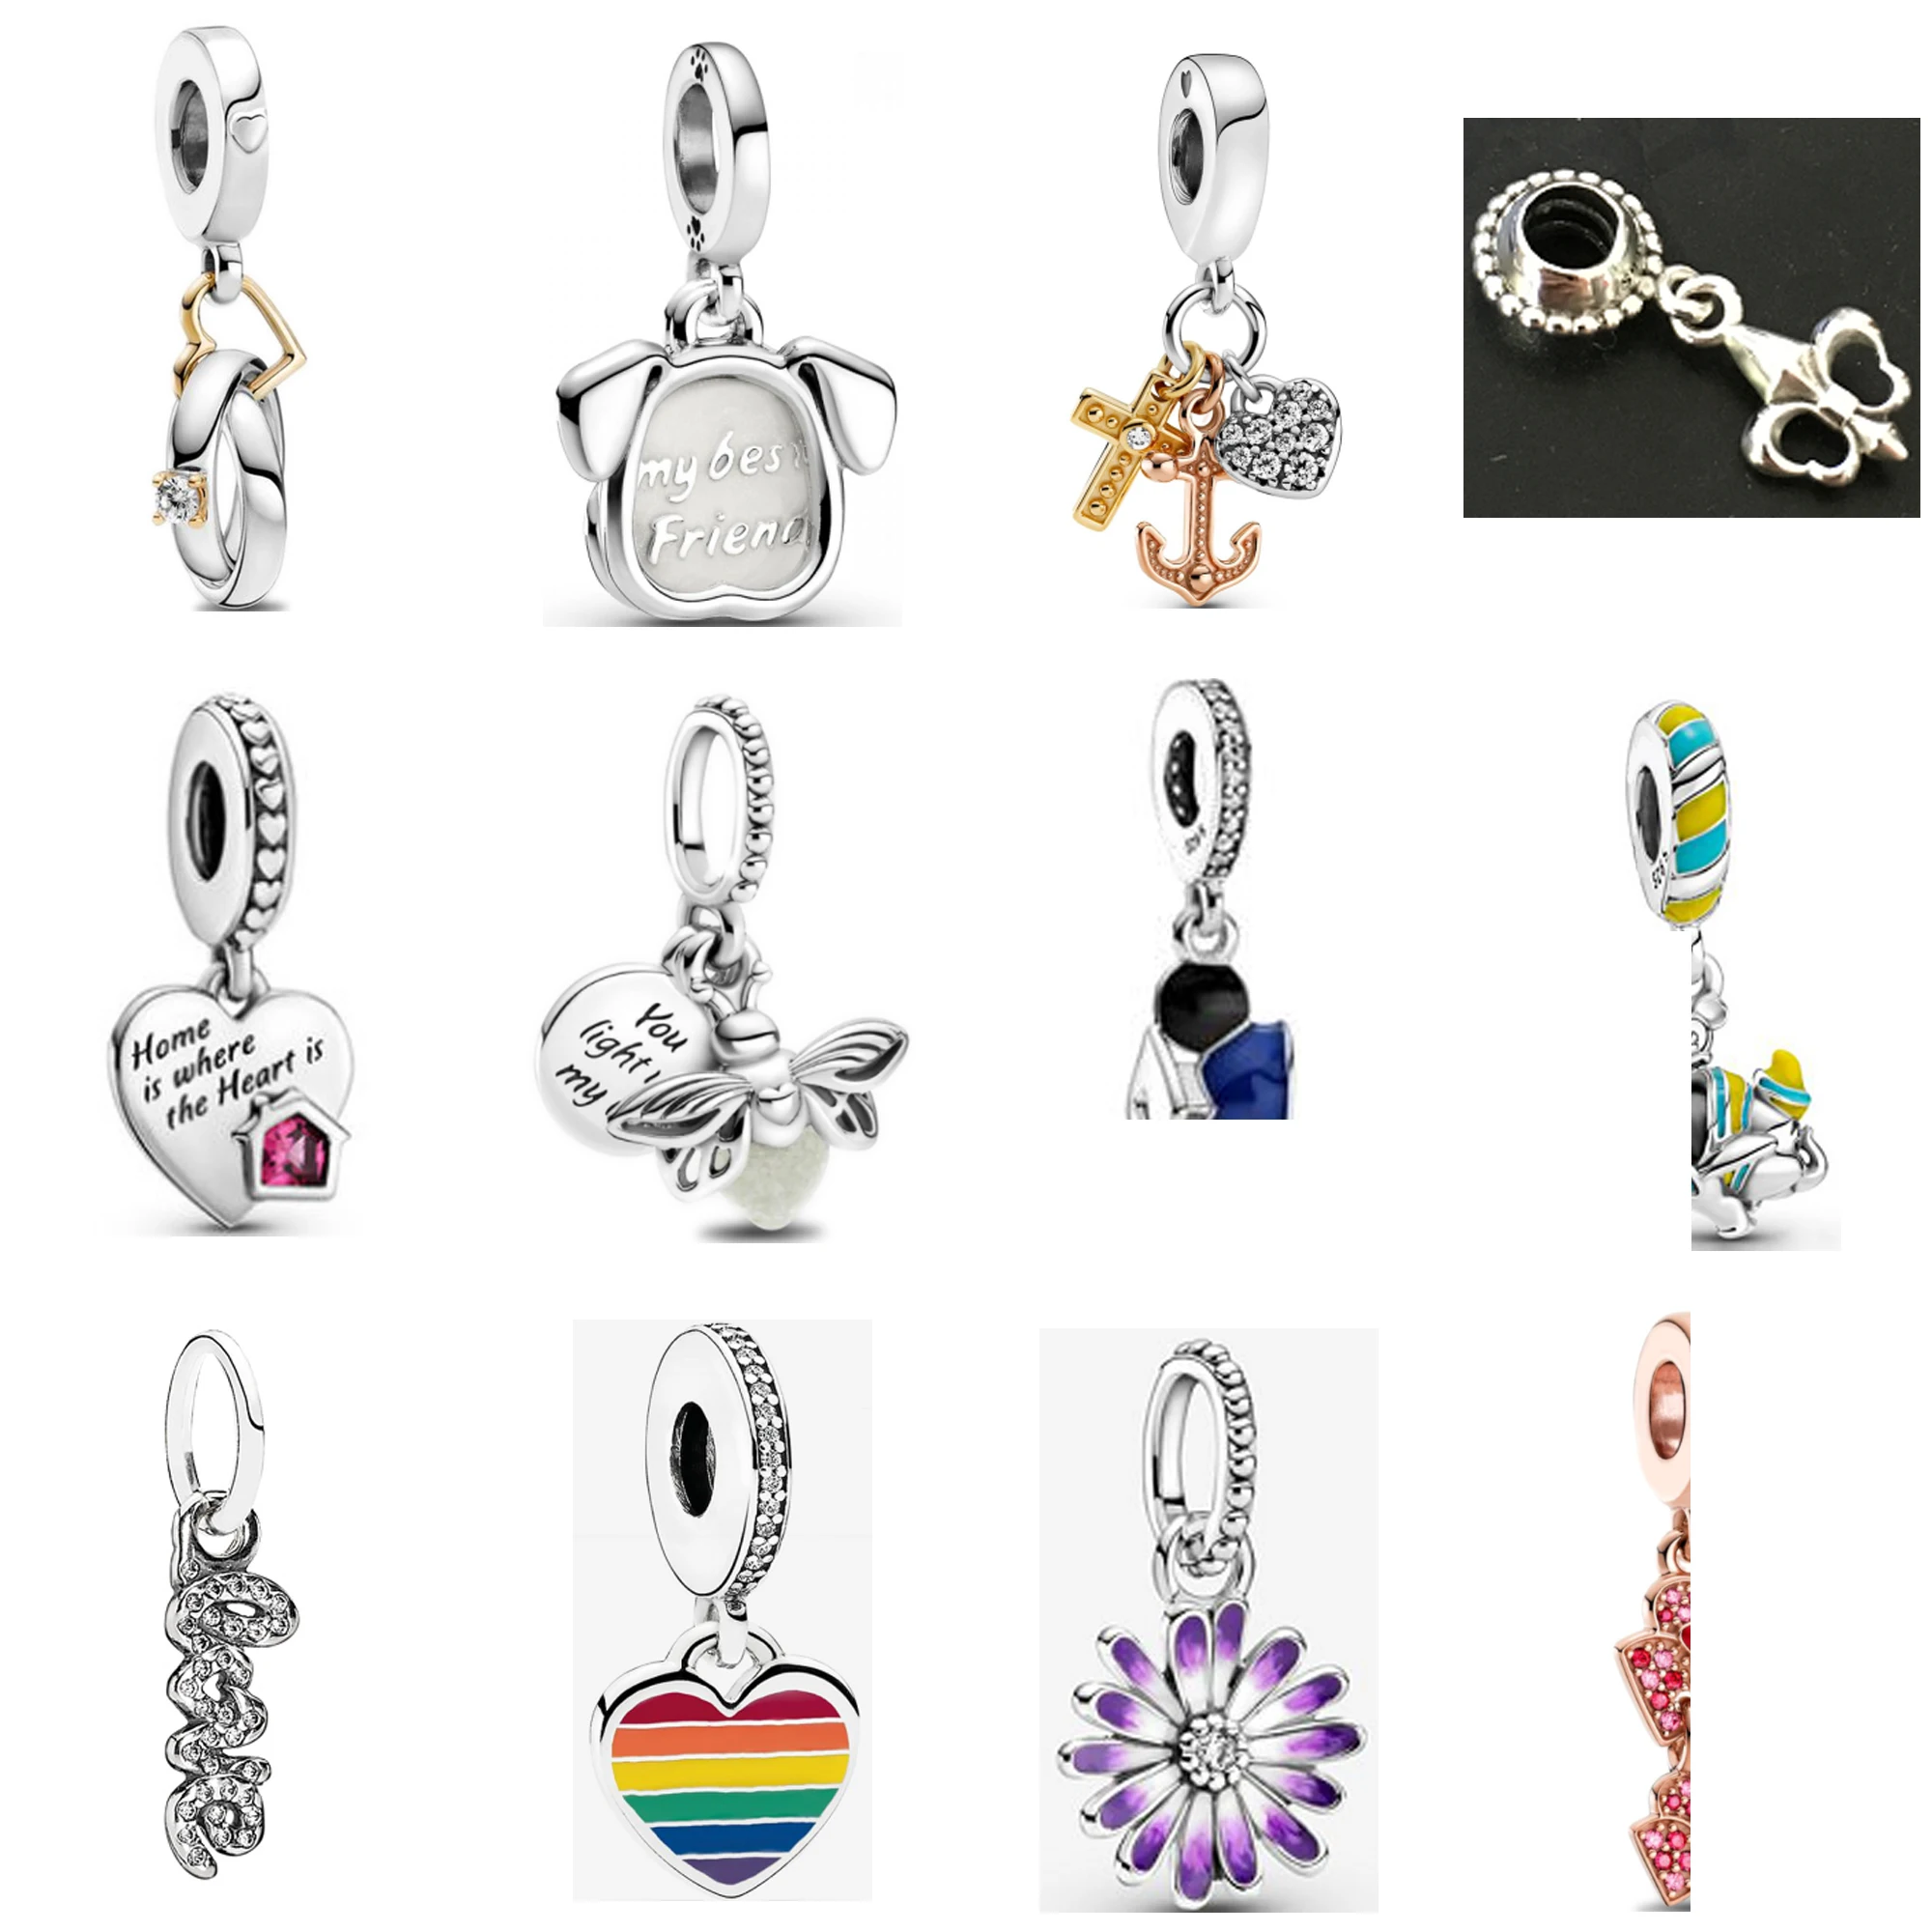 

Pan 925 Sterling Silver Shiny Safety Chain Charm Bead Bracelet Color Love Pig Friend Bee Daisy Pendant DIY